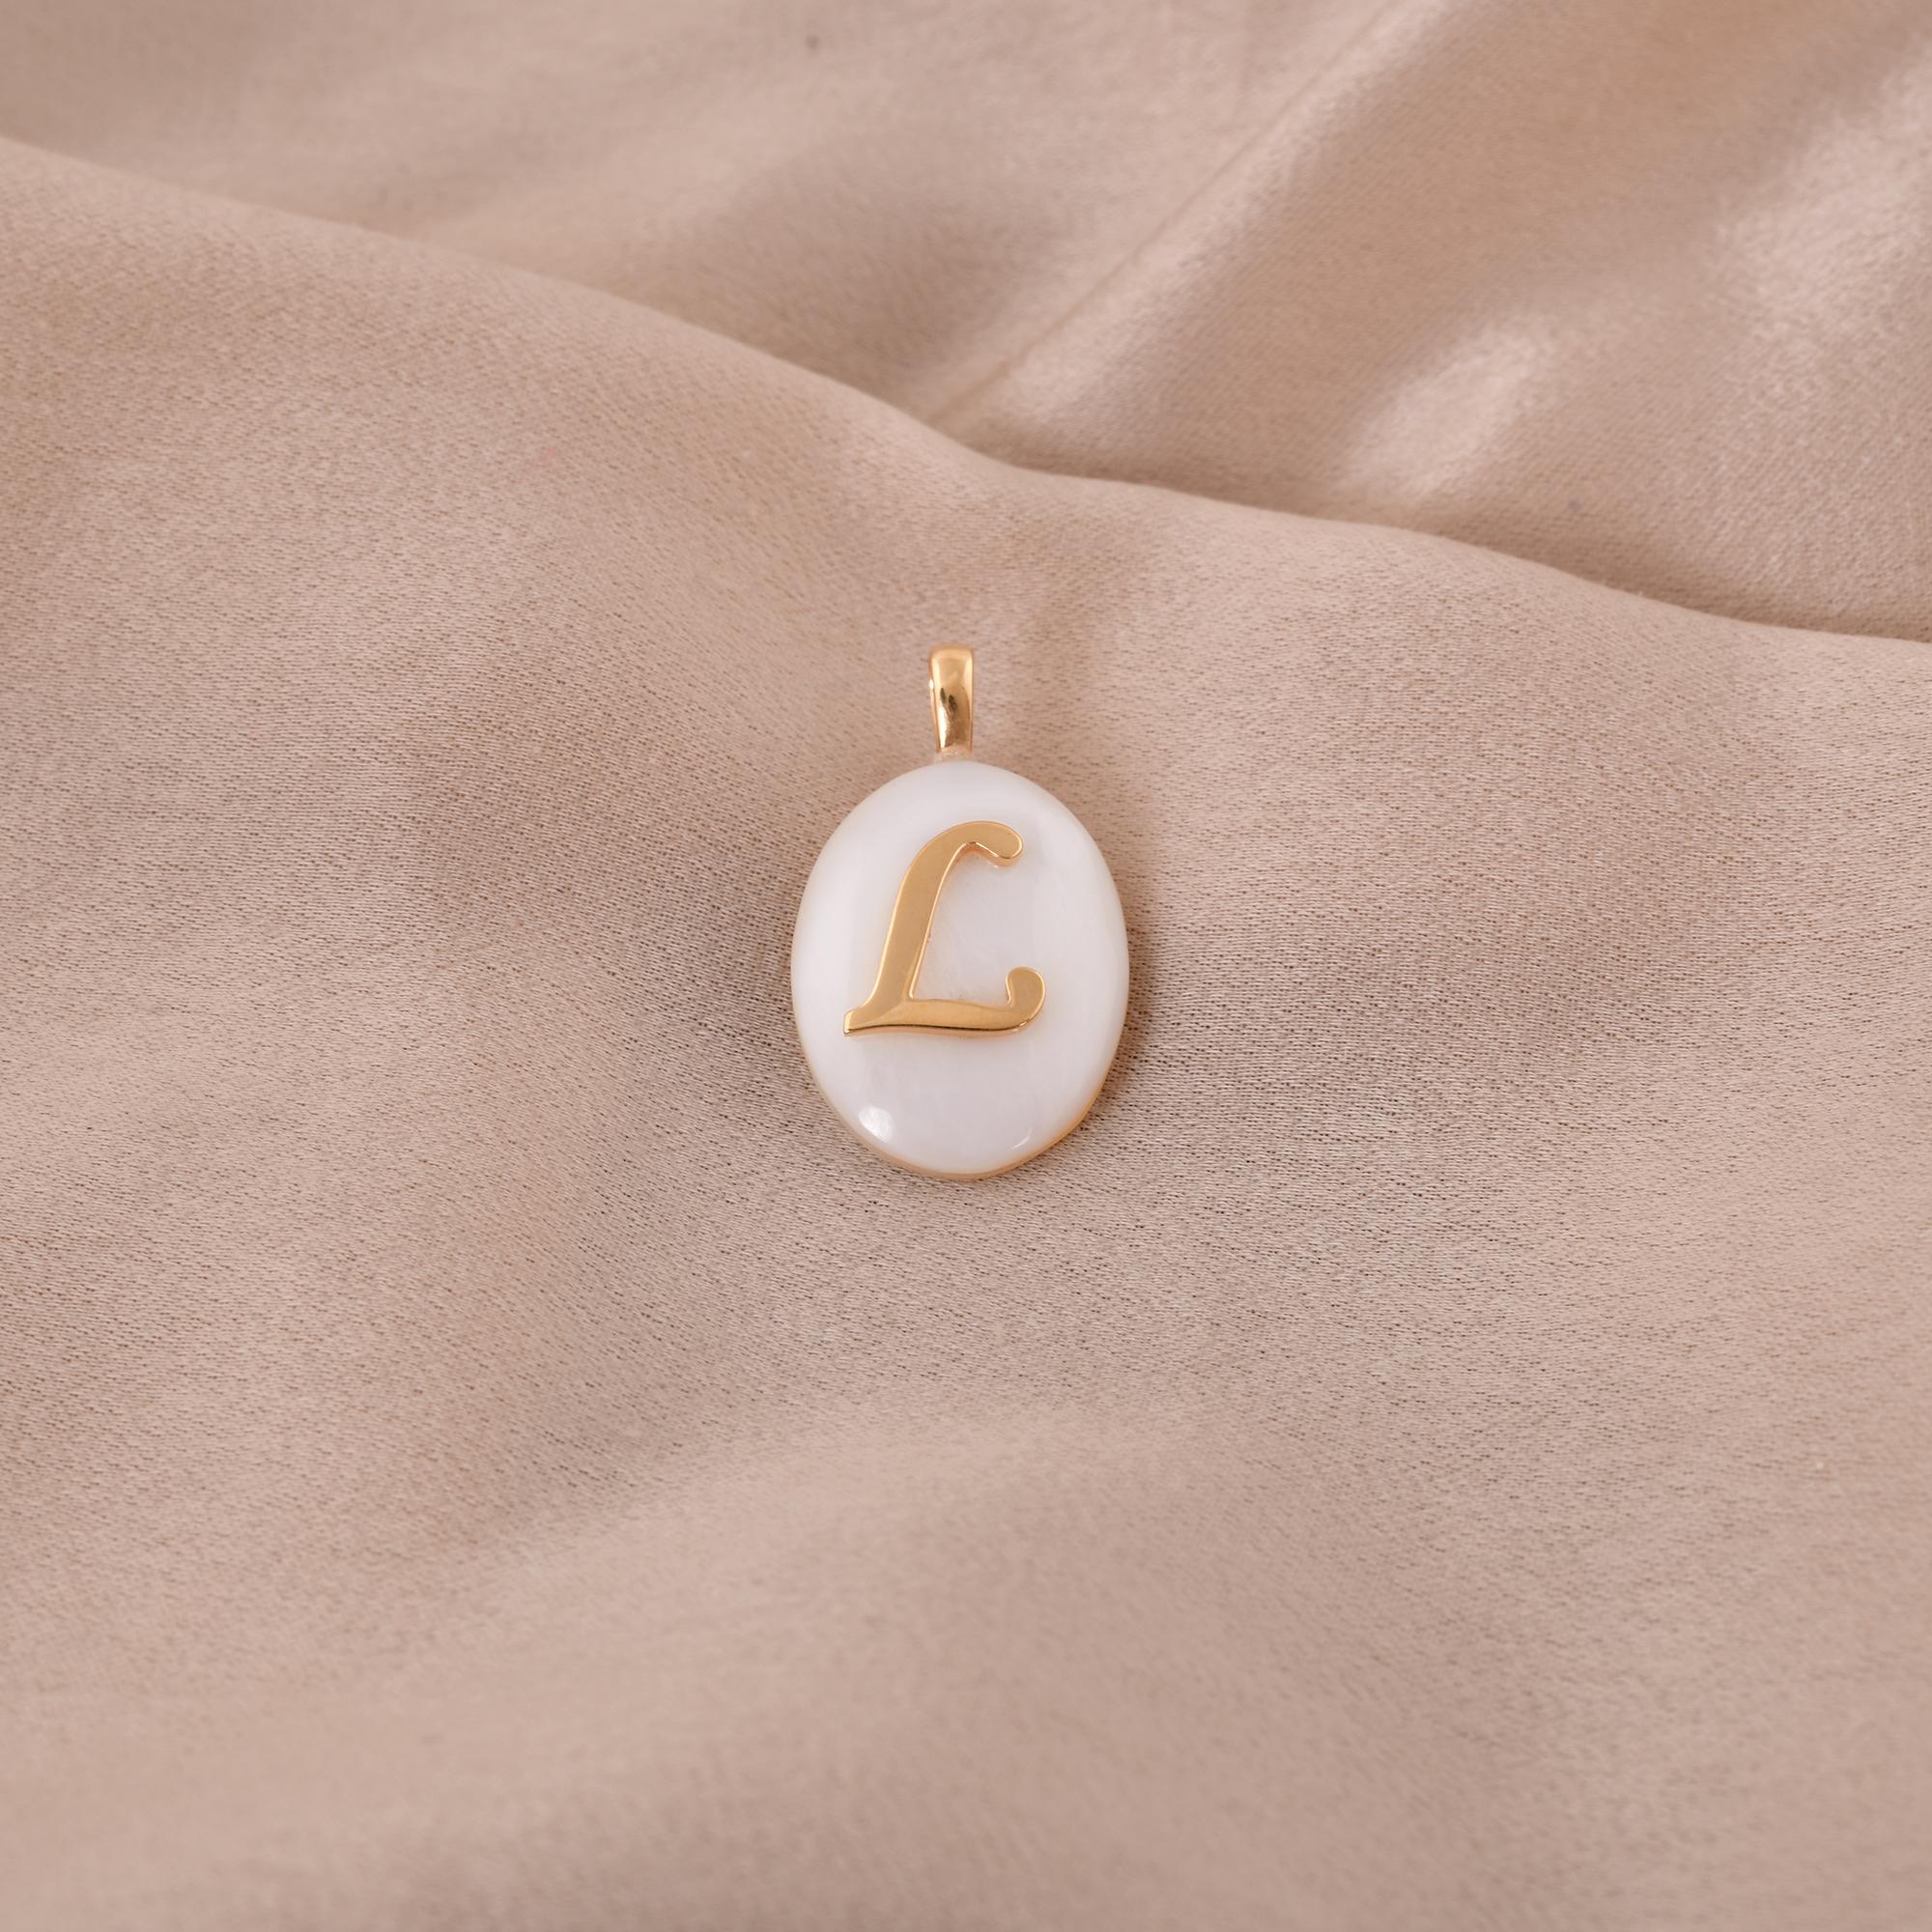 Indulge in the timeless elegance of this exquisite Real Mother of Pearl Gemstone Initial 